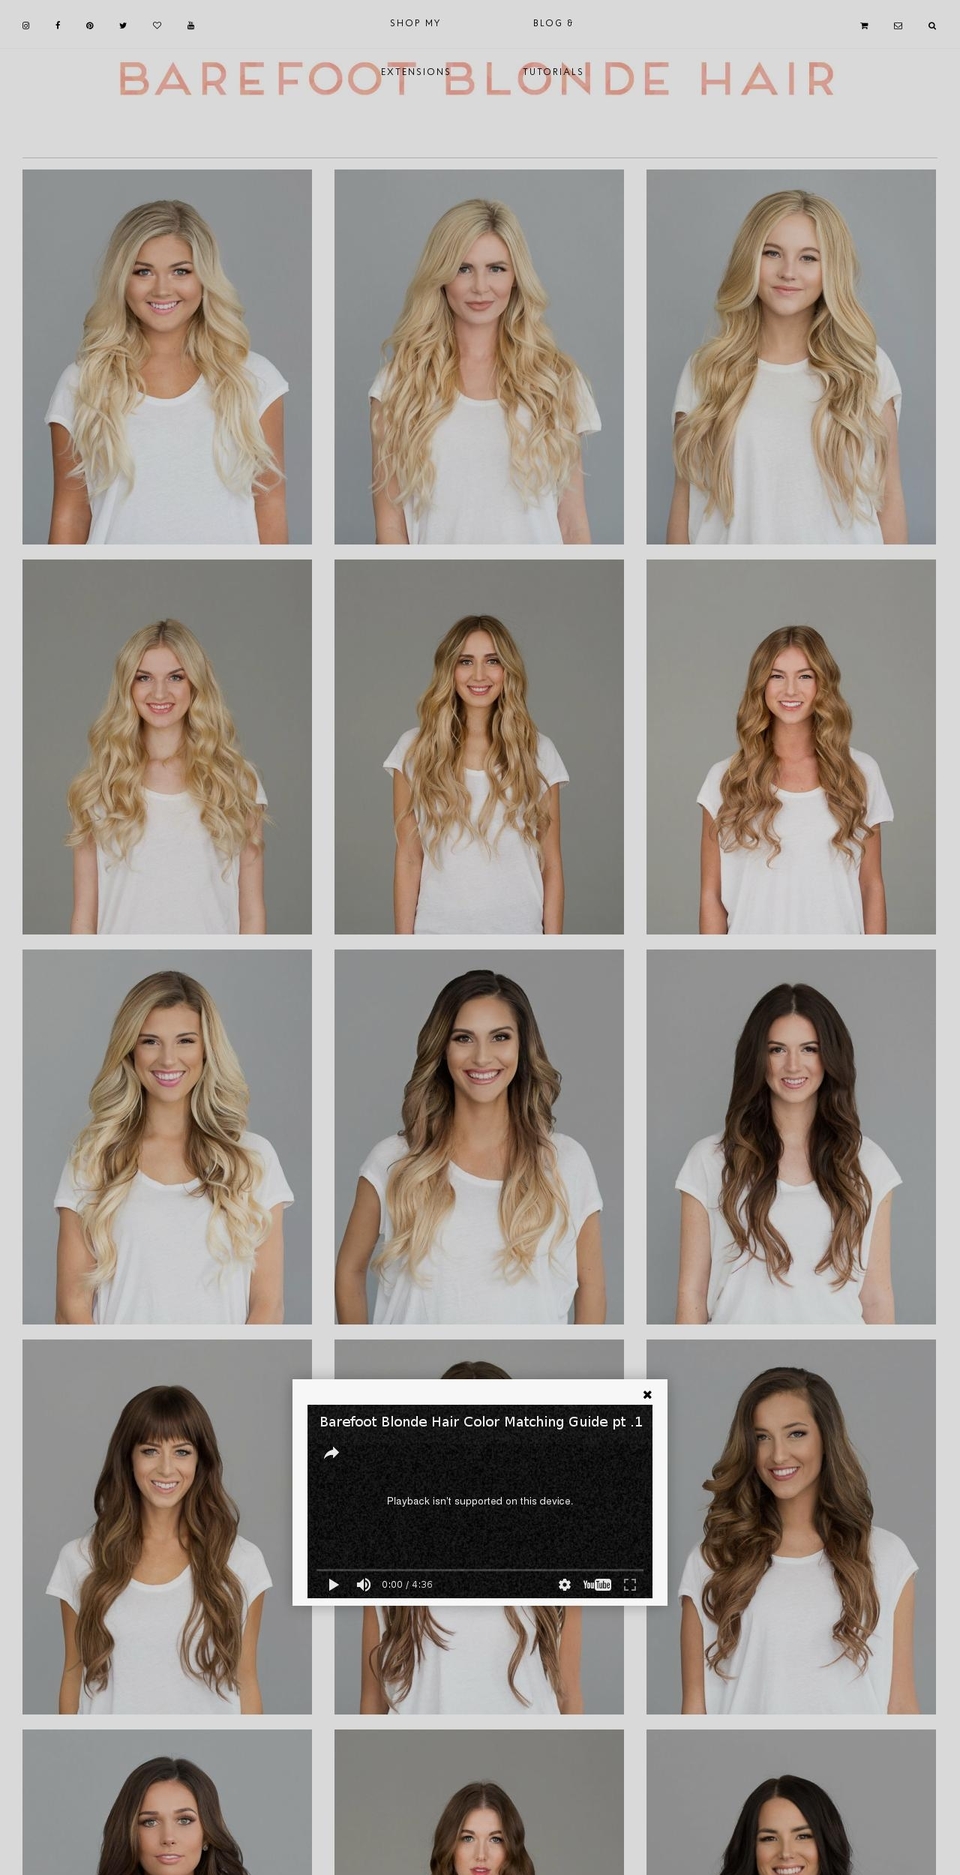 Live Site Shopify theme site example barefootblondehair.com